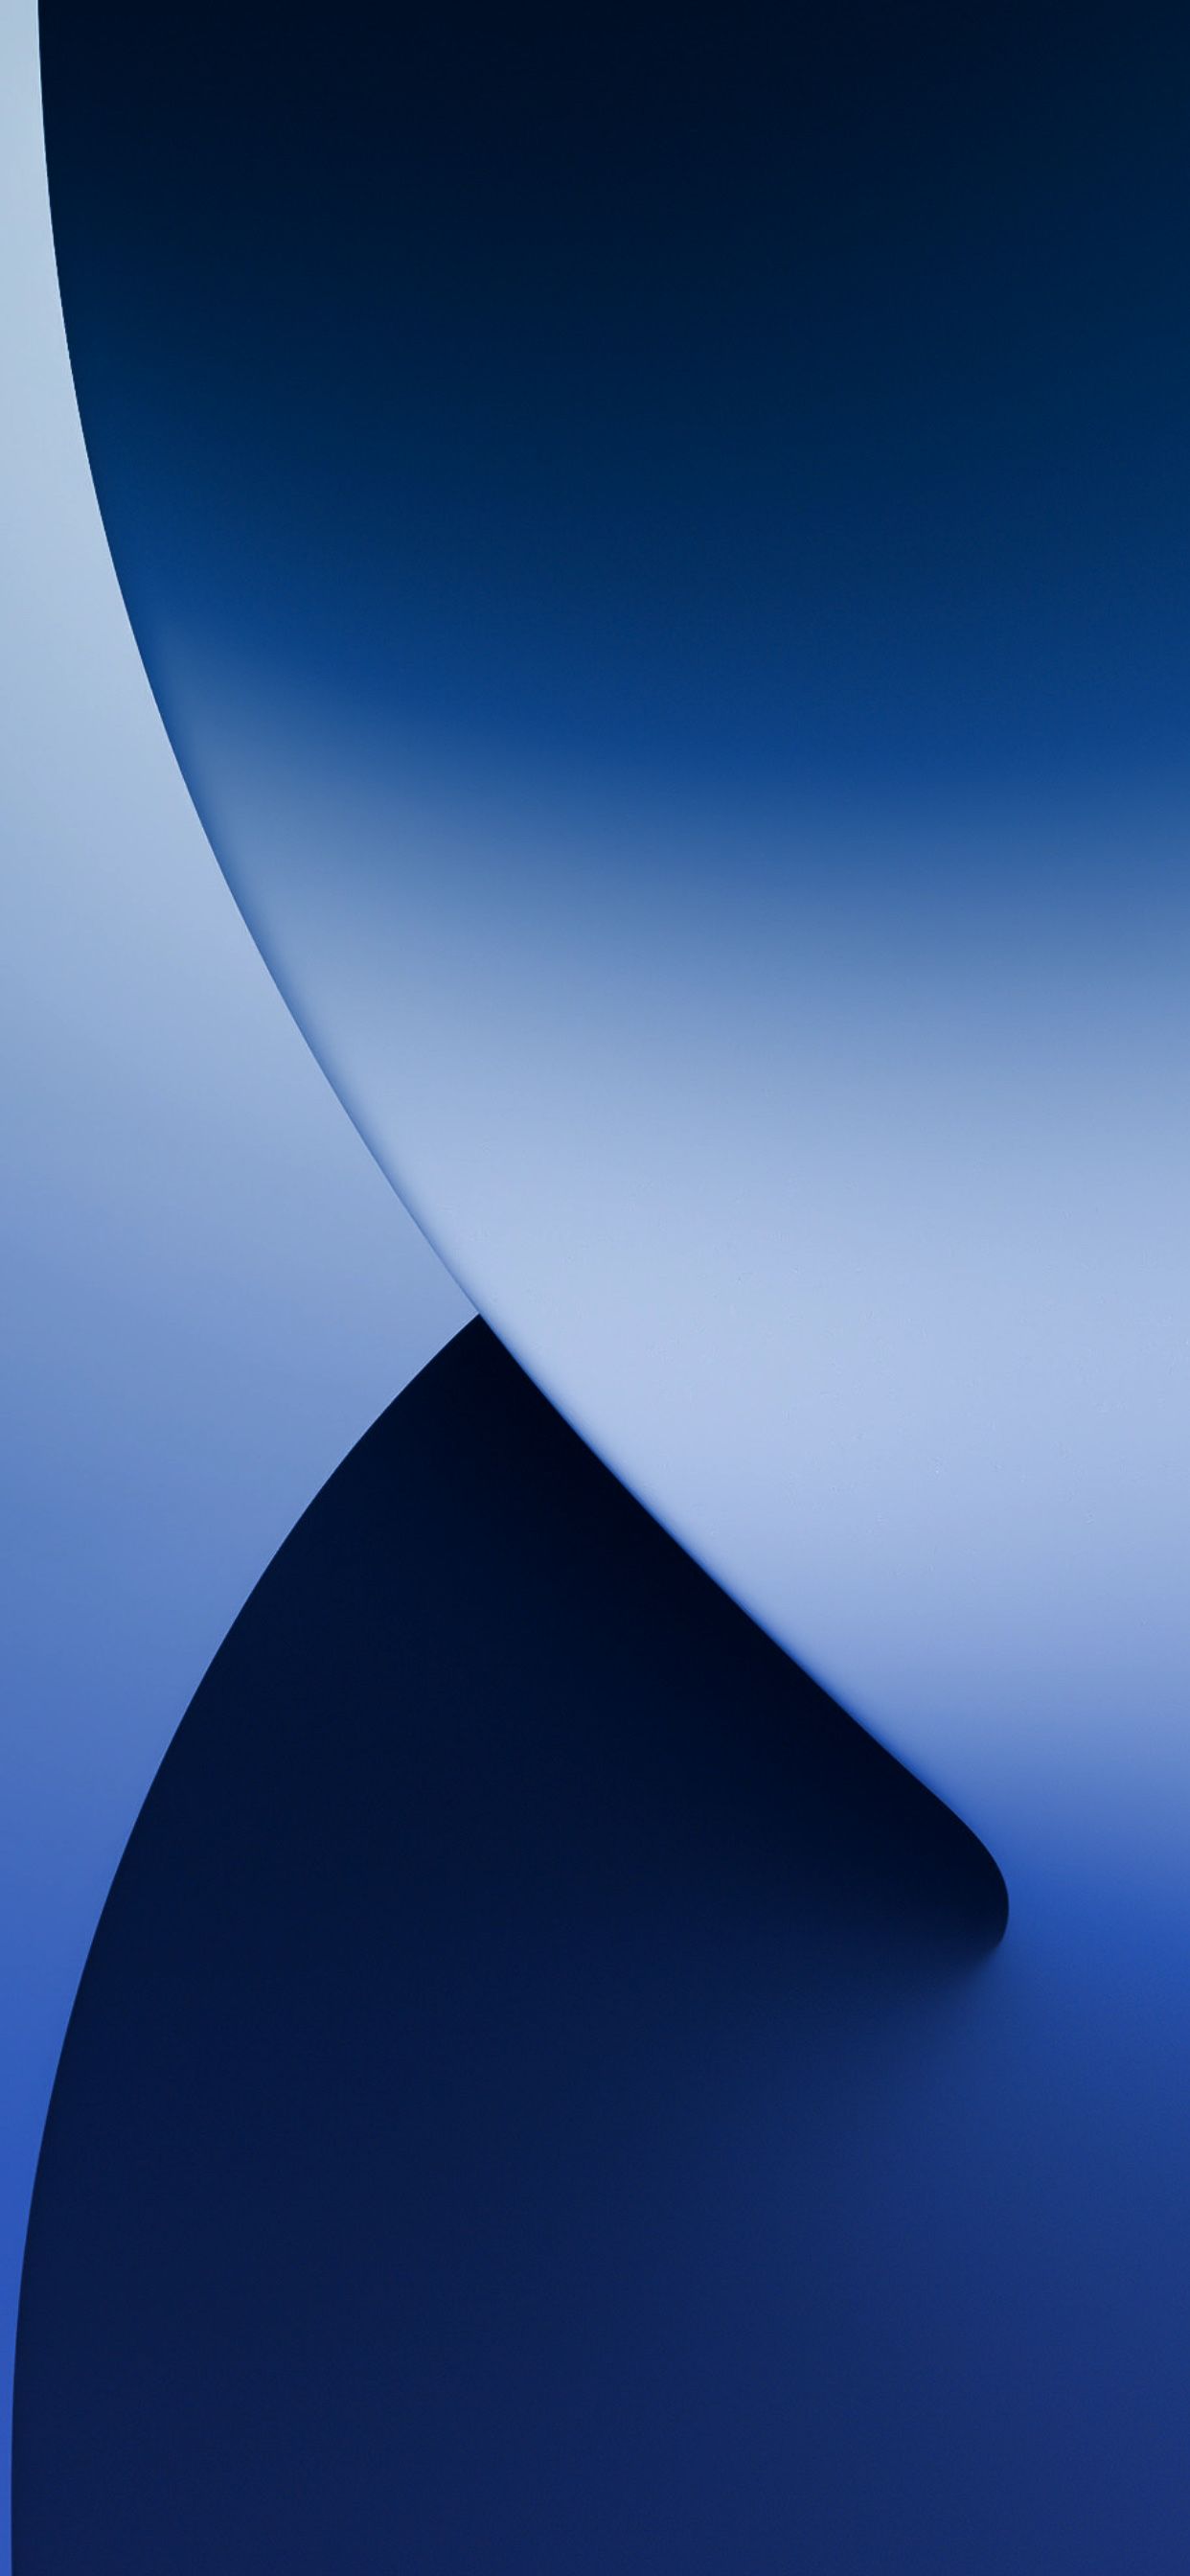 Free download iOS 14 Wallpaper in 2020 Abstract iphone wallpaper Iphone ...